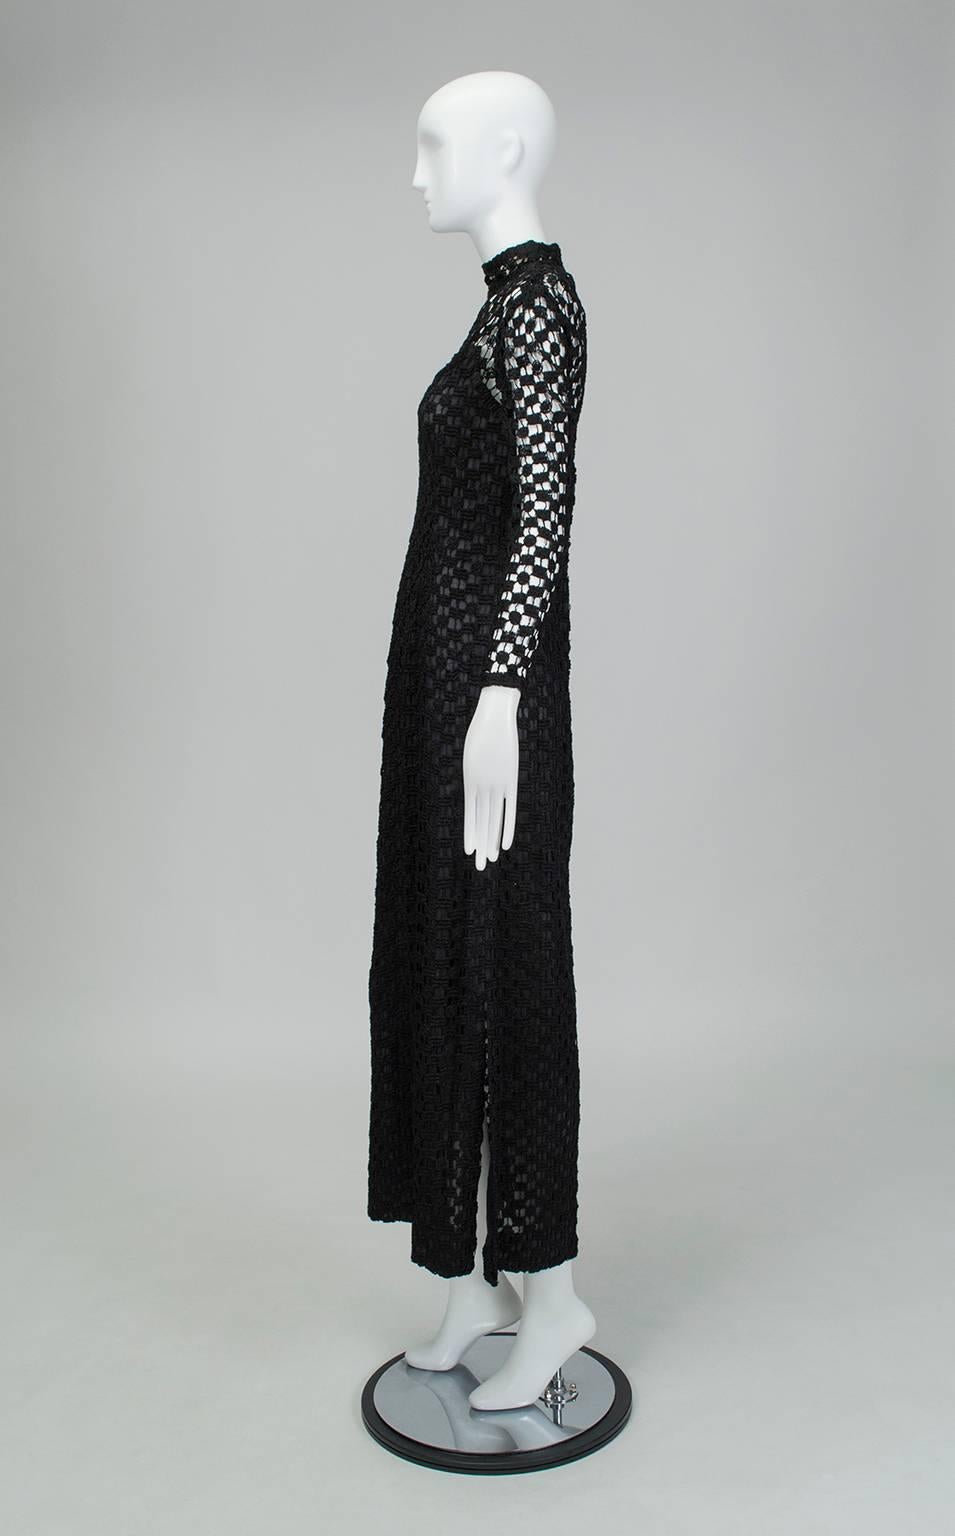 Nearly identical to the louche white crochet maxi dress made famous by Jane Birkin, this frock is both a little bit hippie and a little bit rock and roll. The banded neckline and columnar silhouette belong to the beau monde, but the crochet keeps it